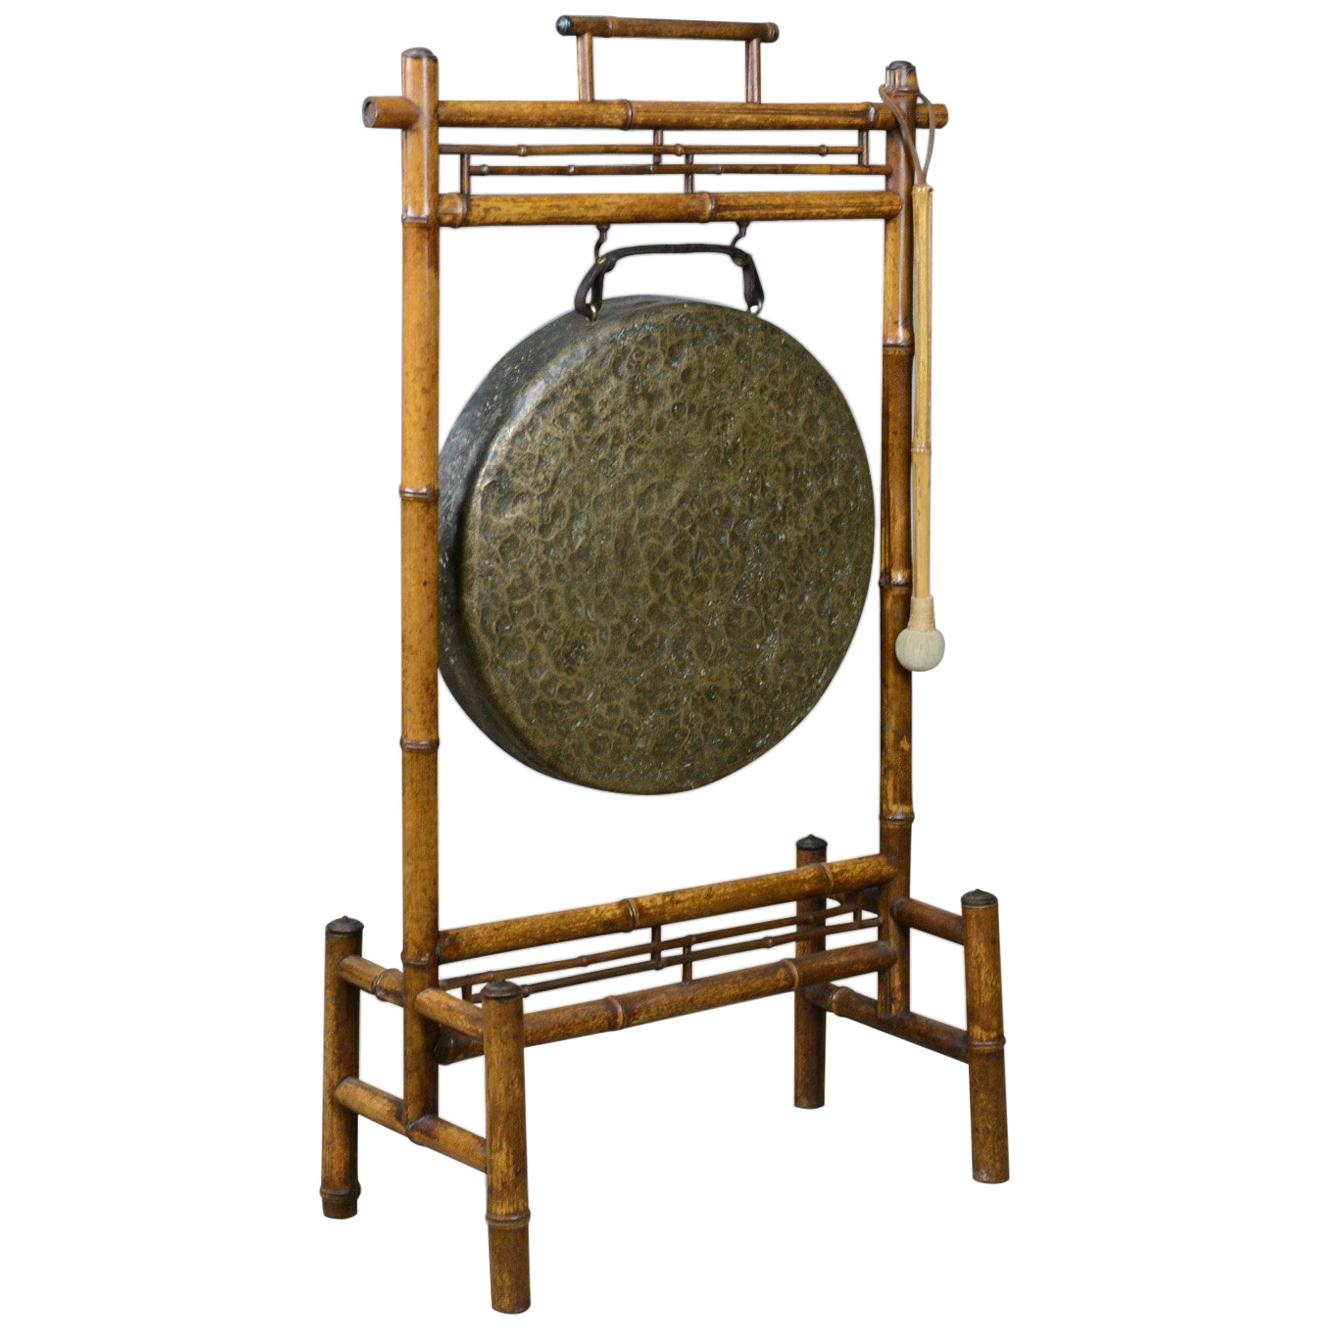 Large Antique Dinner Gong, Bamboo Frame, Victorian Instrument, circa 1890